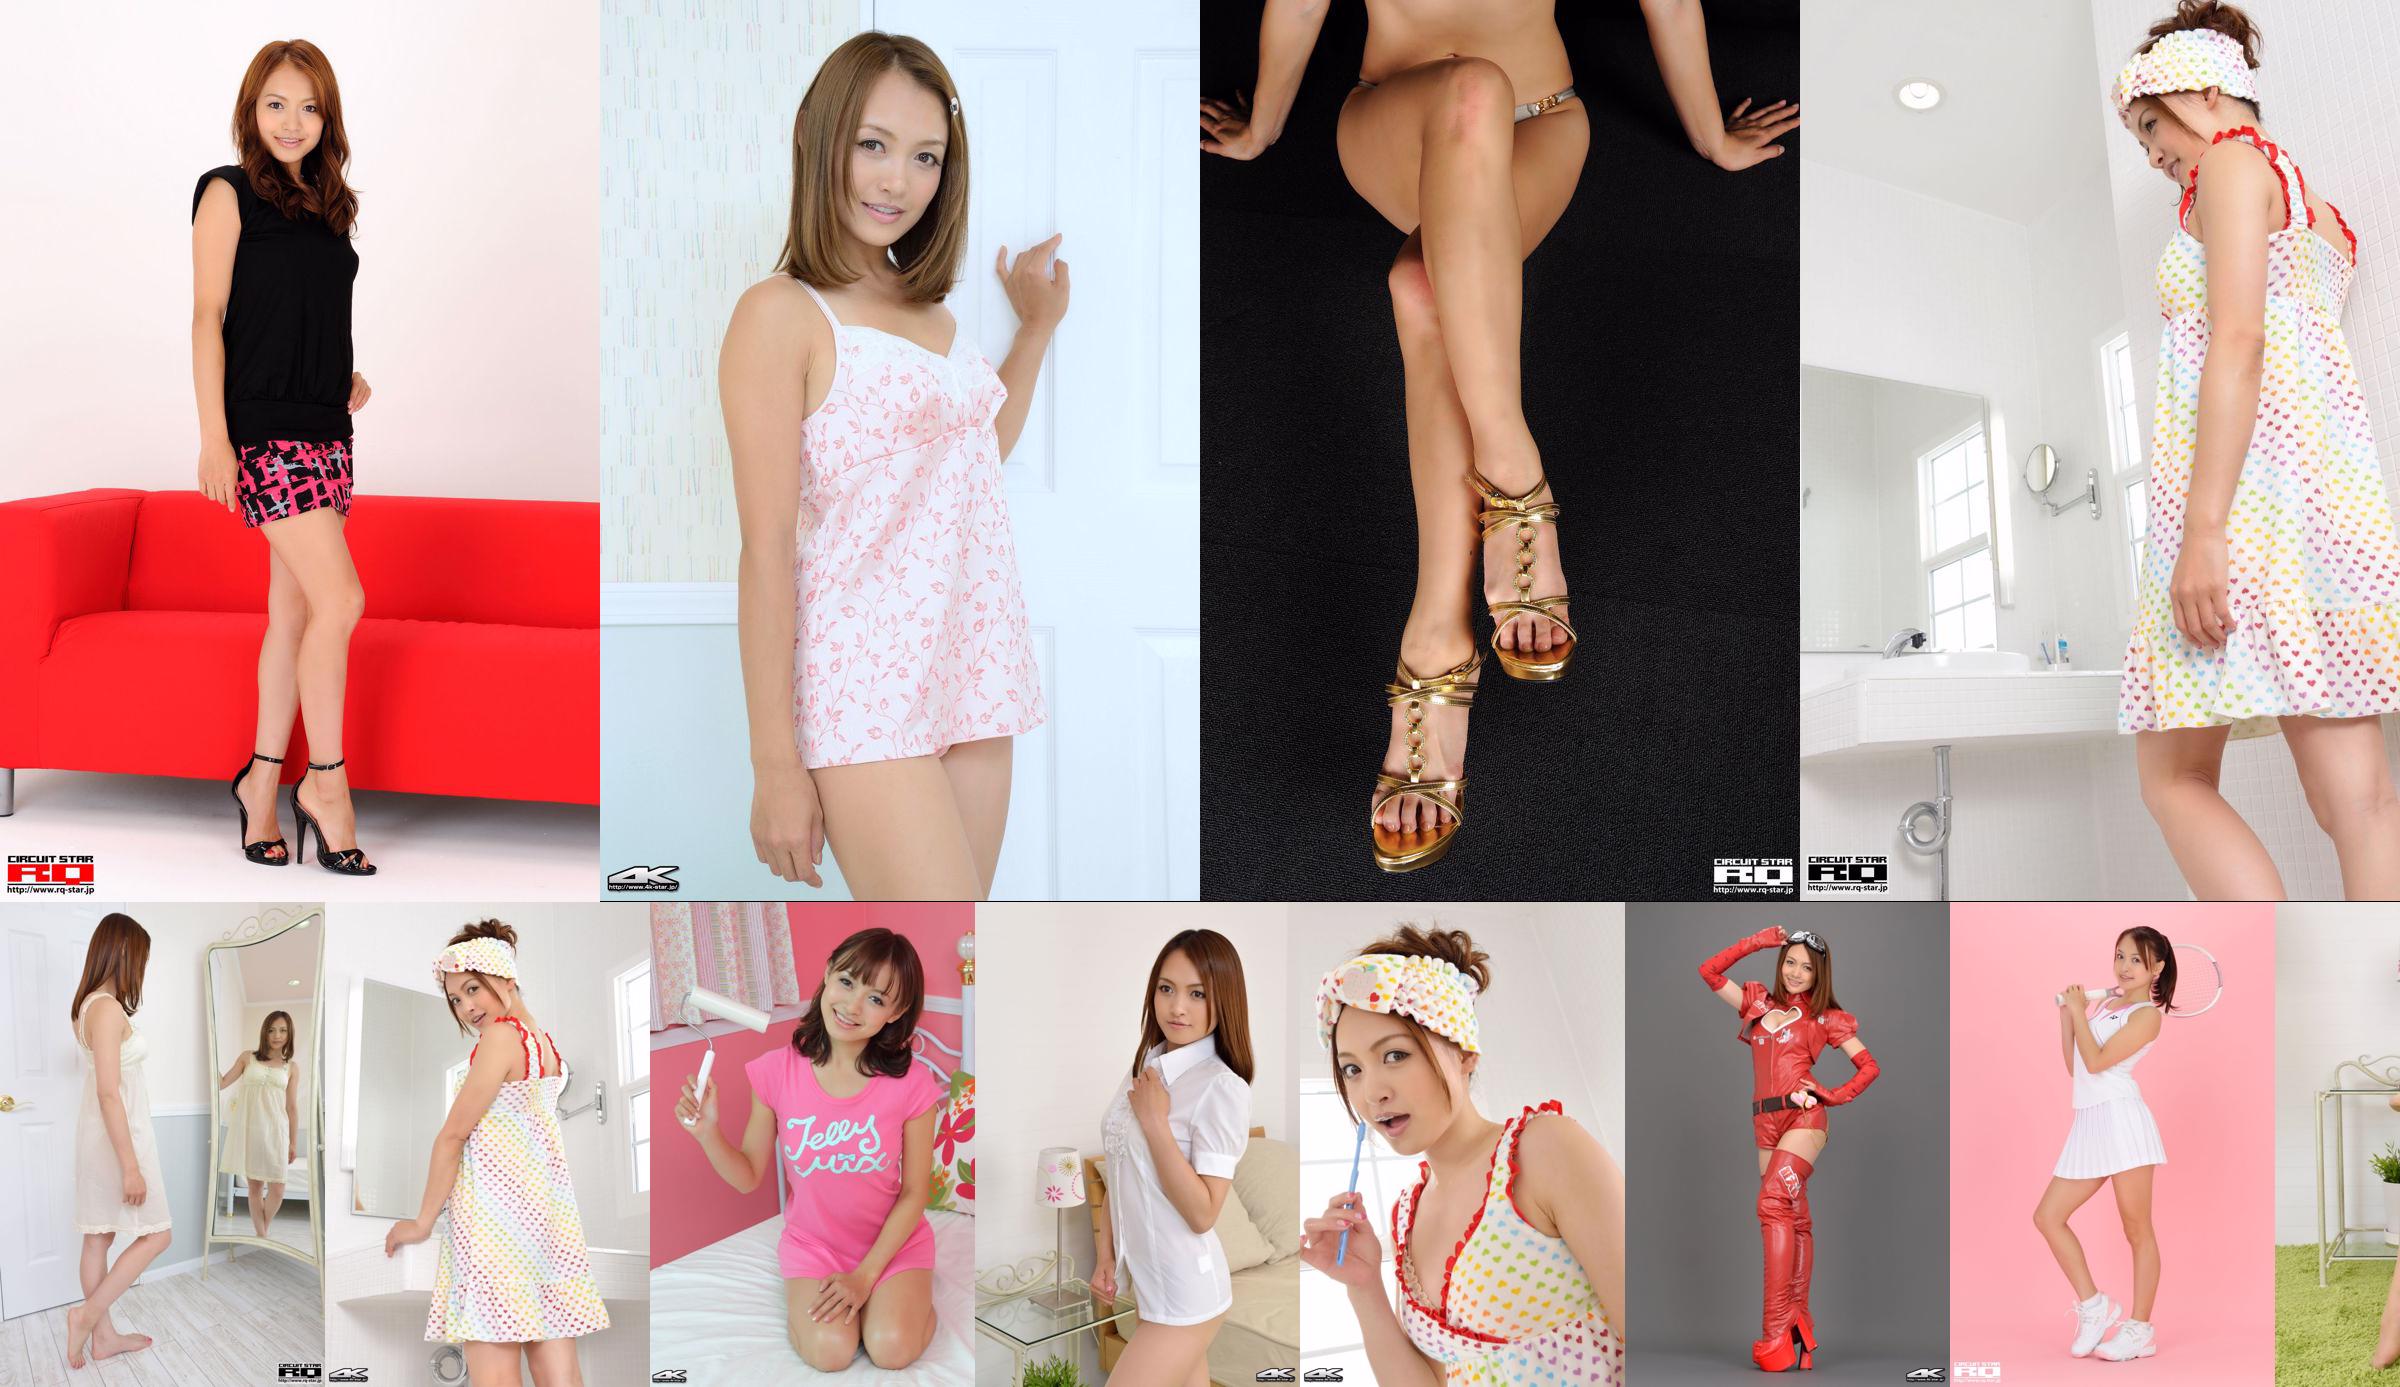 [RQ-STAR] NO.01033 Rina Itoh いとうりな Race Queen 赛车女郎 No.cea70a 第1頁